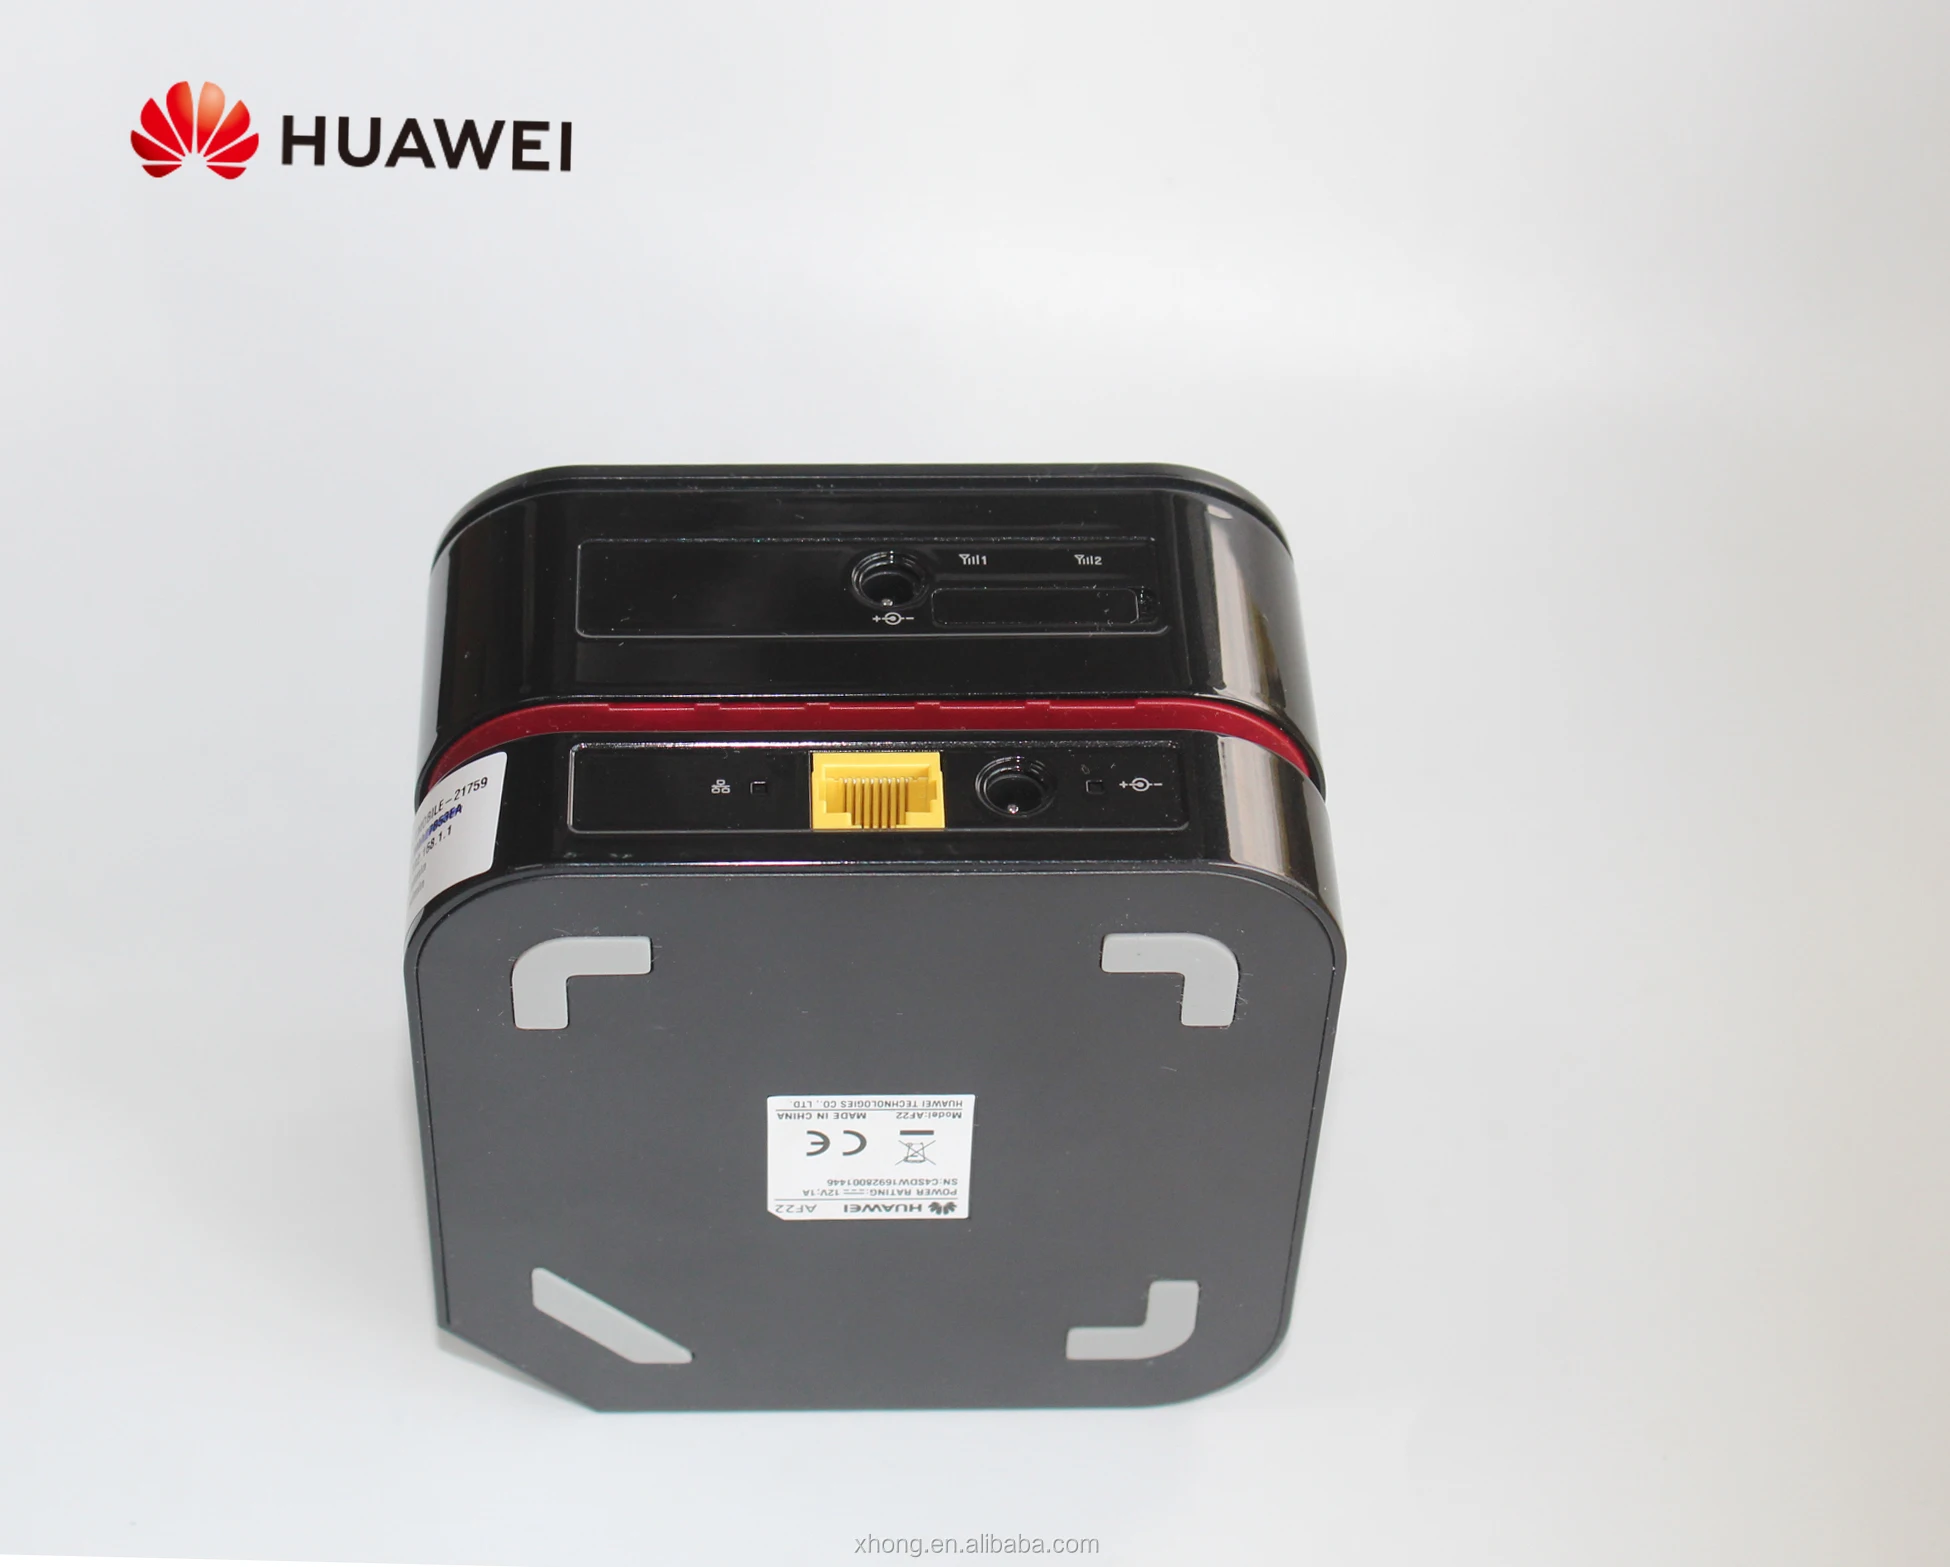 ULOCKED HUAWEI E5170s-22 4G LTE 150Mb WiFi Router Speed Cube Mobile WLAN Hotspot 